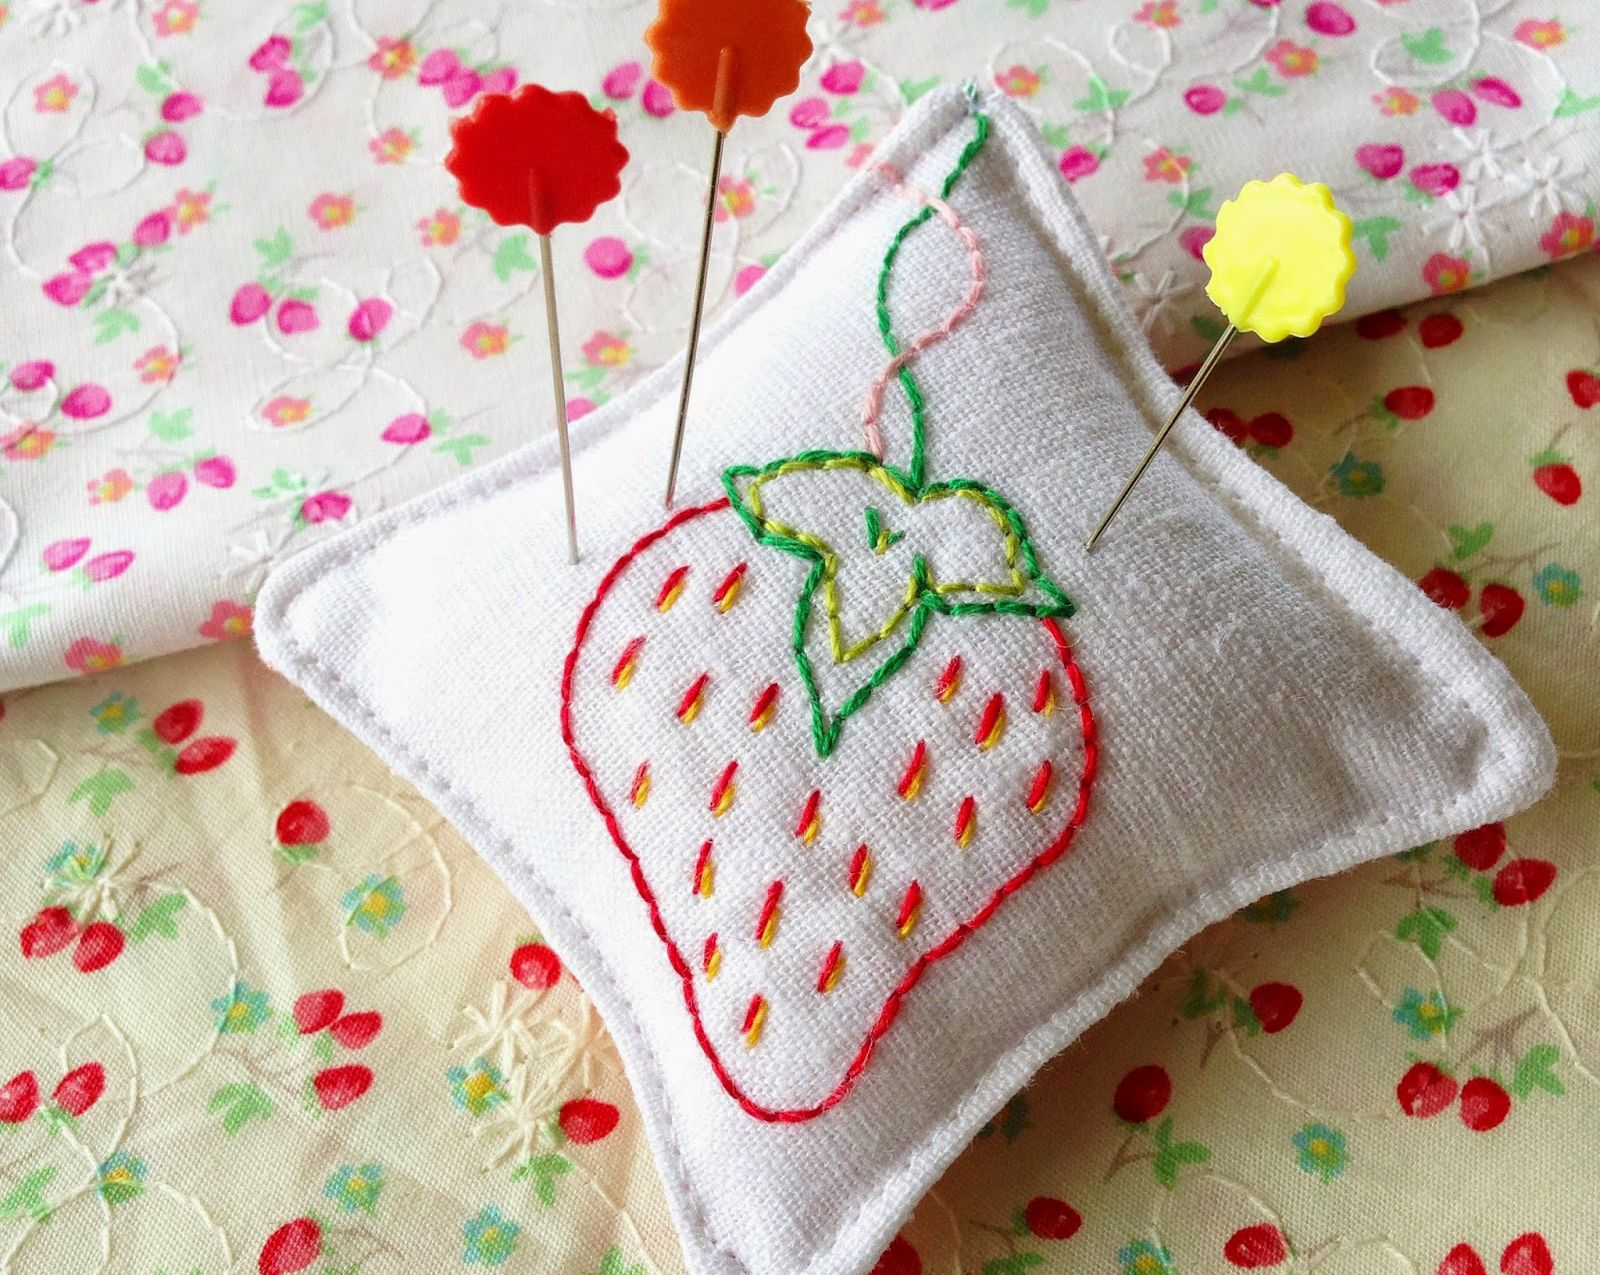 Fun Embroidery Patterns 10 Free Embroidery Patterns For Beginners